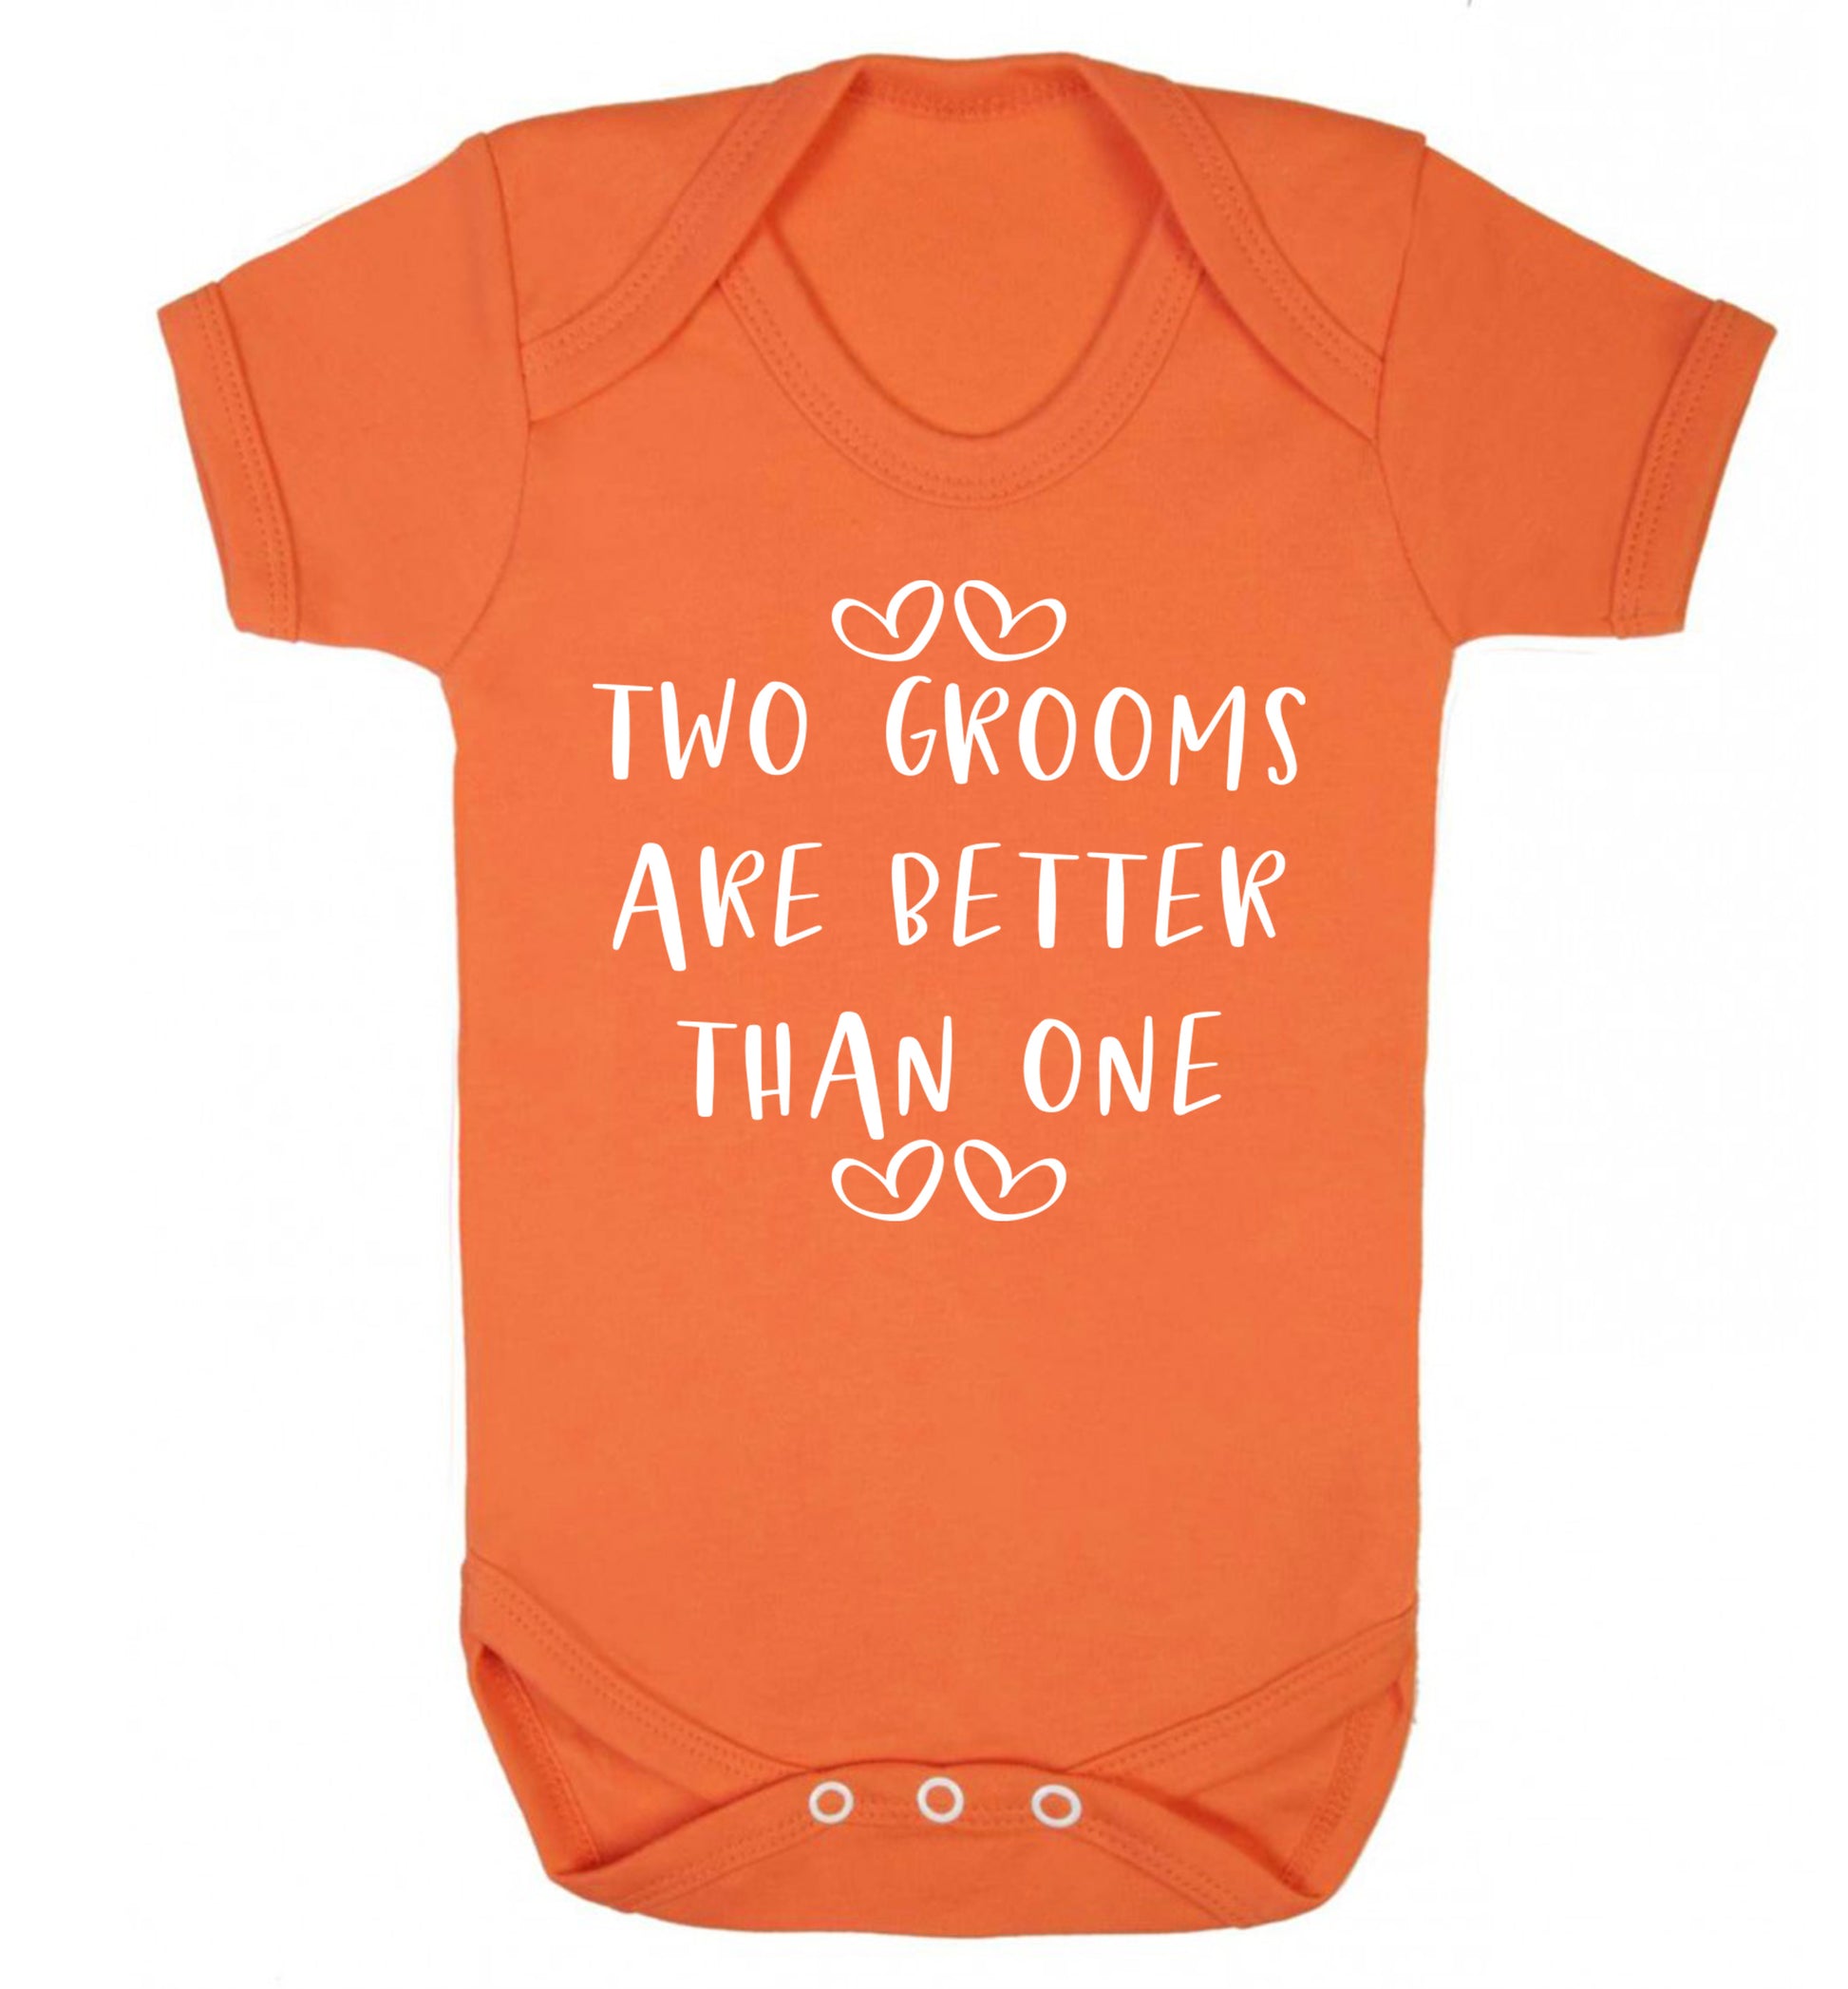 Two grooms are better than one baby vest orange 18-24 months